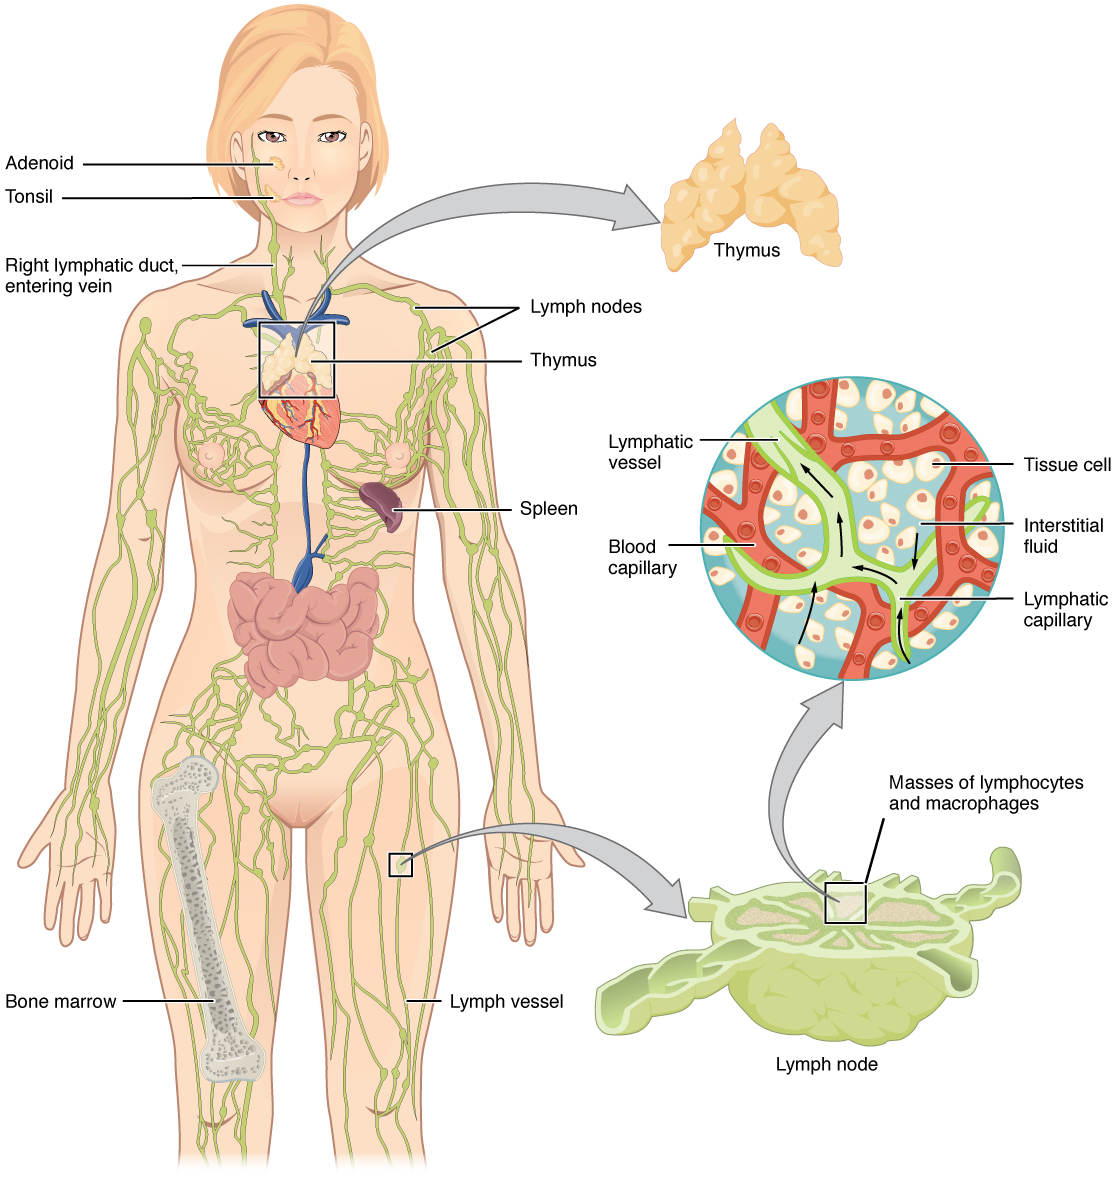 Lymphatic system in the human body. Image description available.